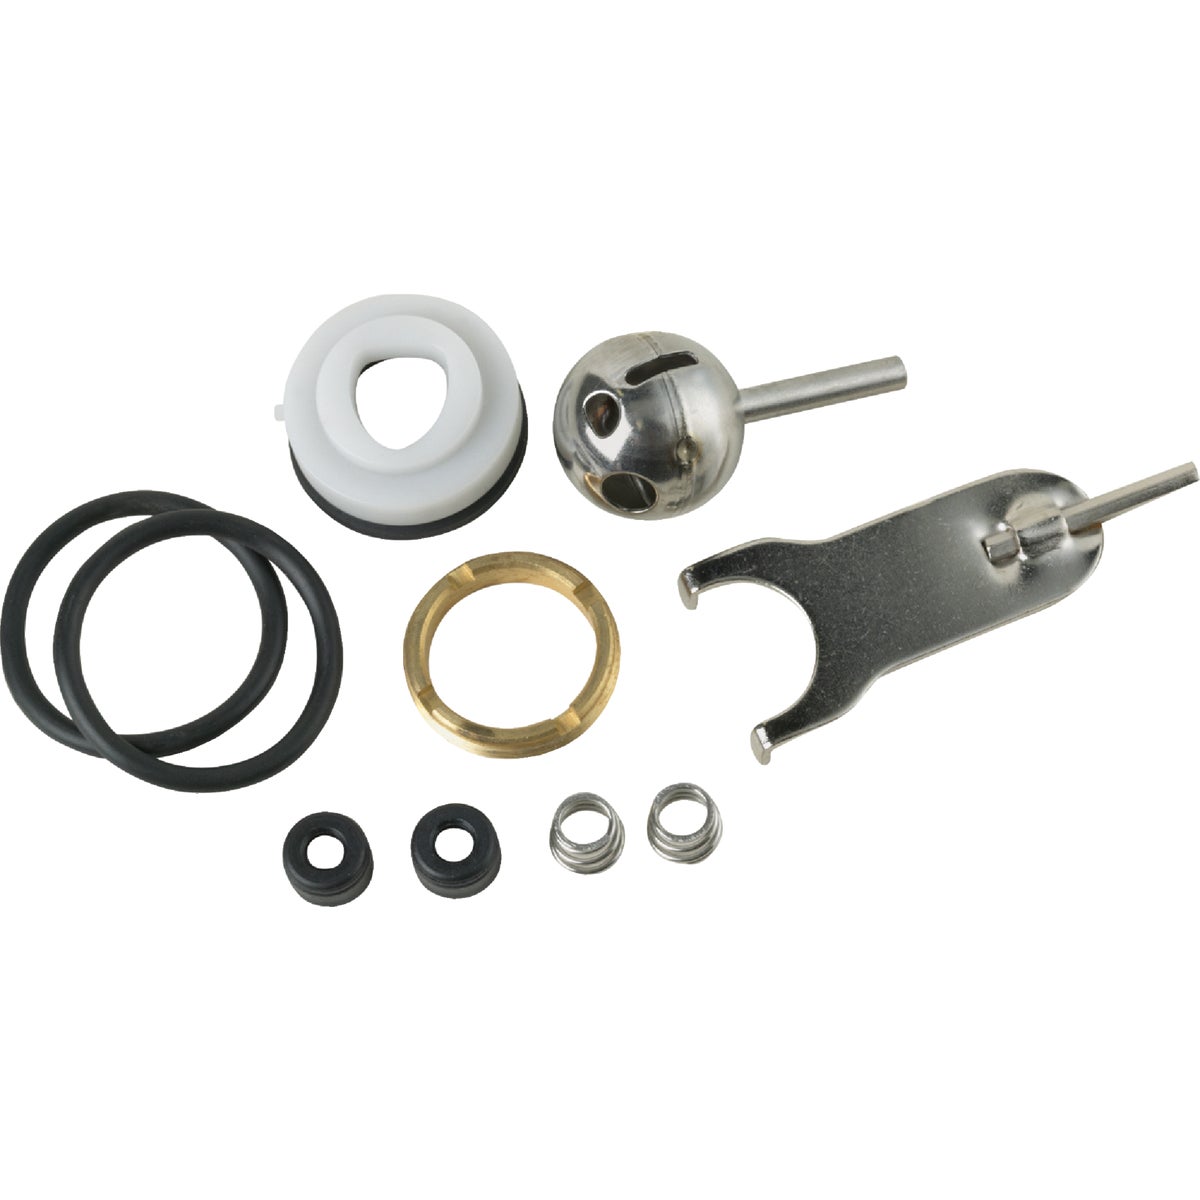 Item 459615, Single handle kitchen and lavatory faucet repair kit includes: 2 seats, 2 